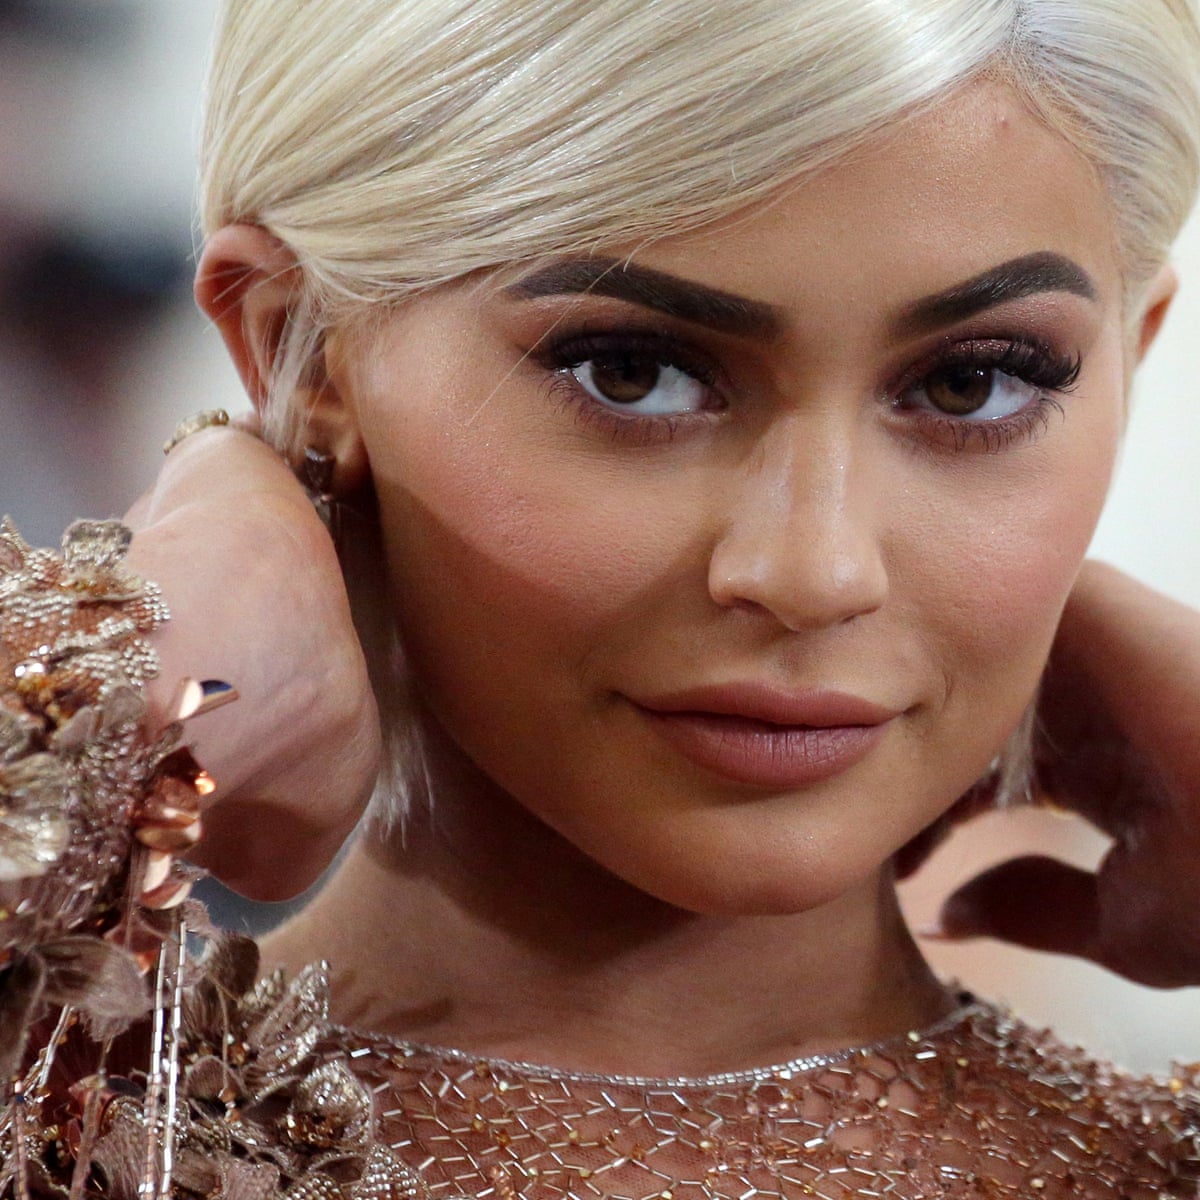 Straight from the lip: how Kylie Jenner is close to becoming a billionaire at | Business |